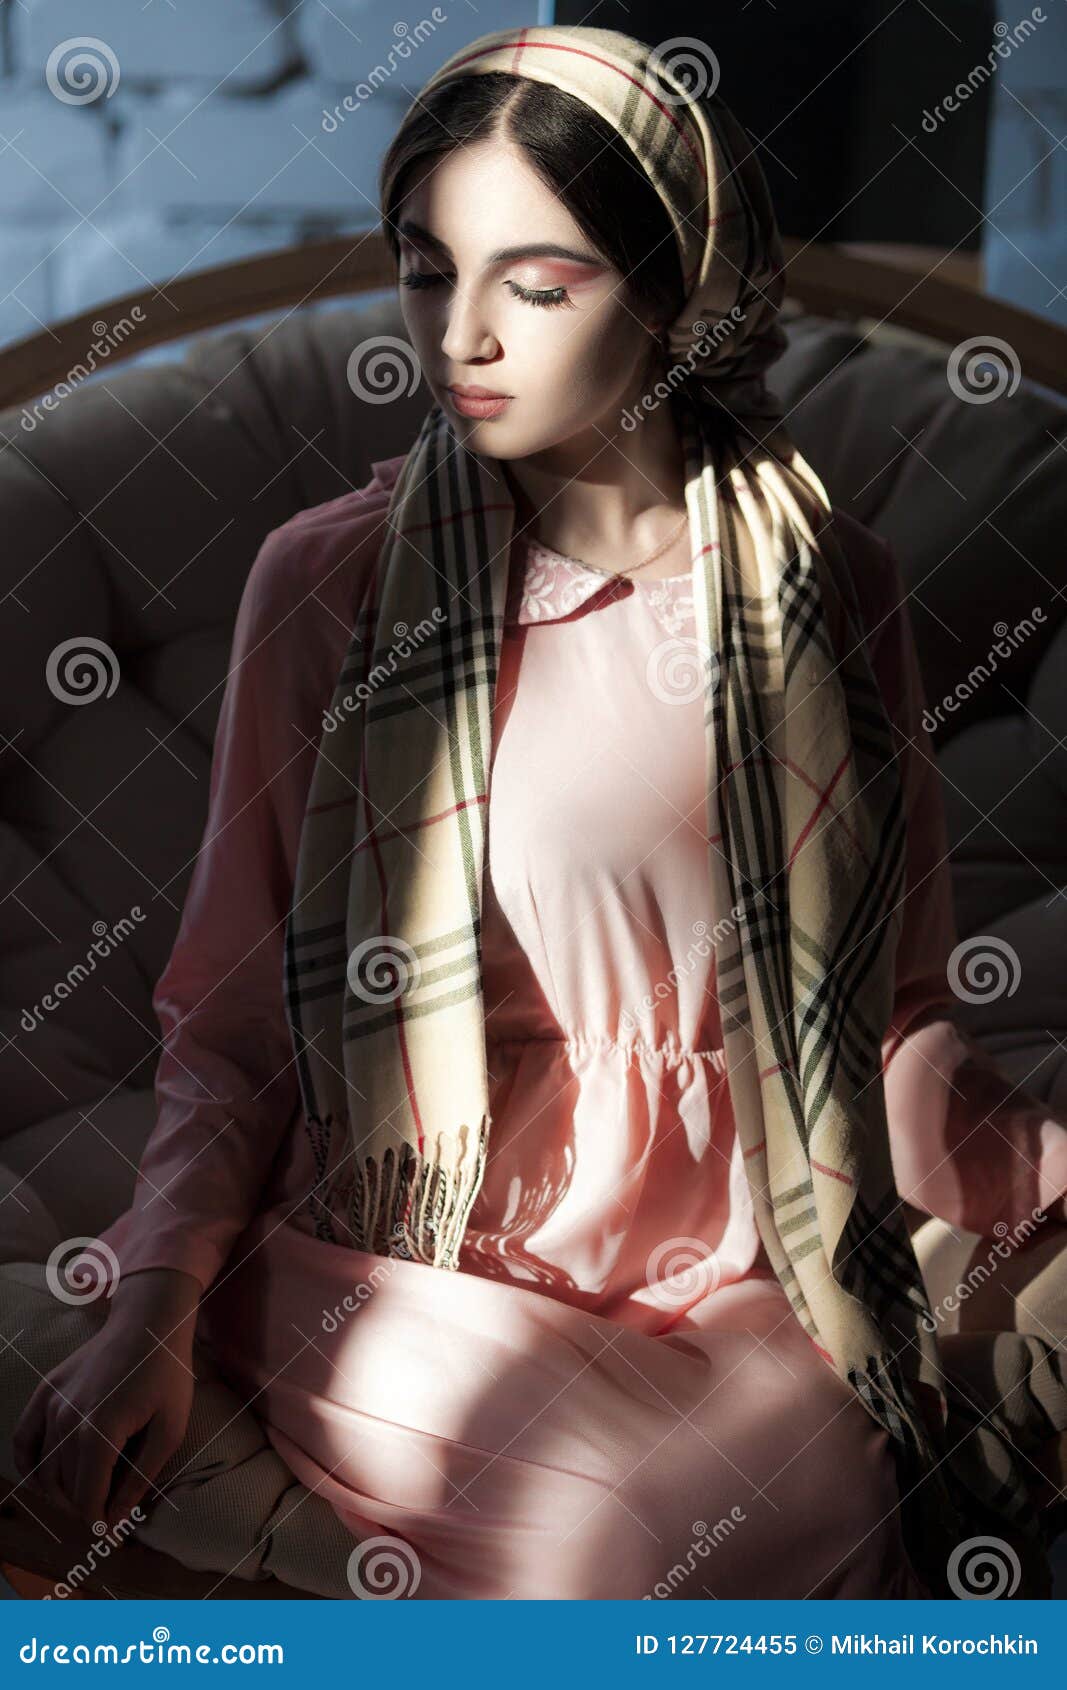 Young Arab Girl With Oriental Makeup In Hijab Stock Image Image